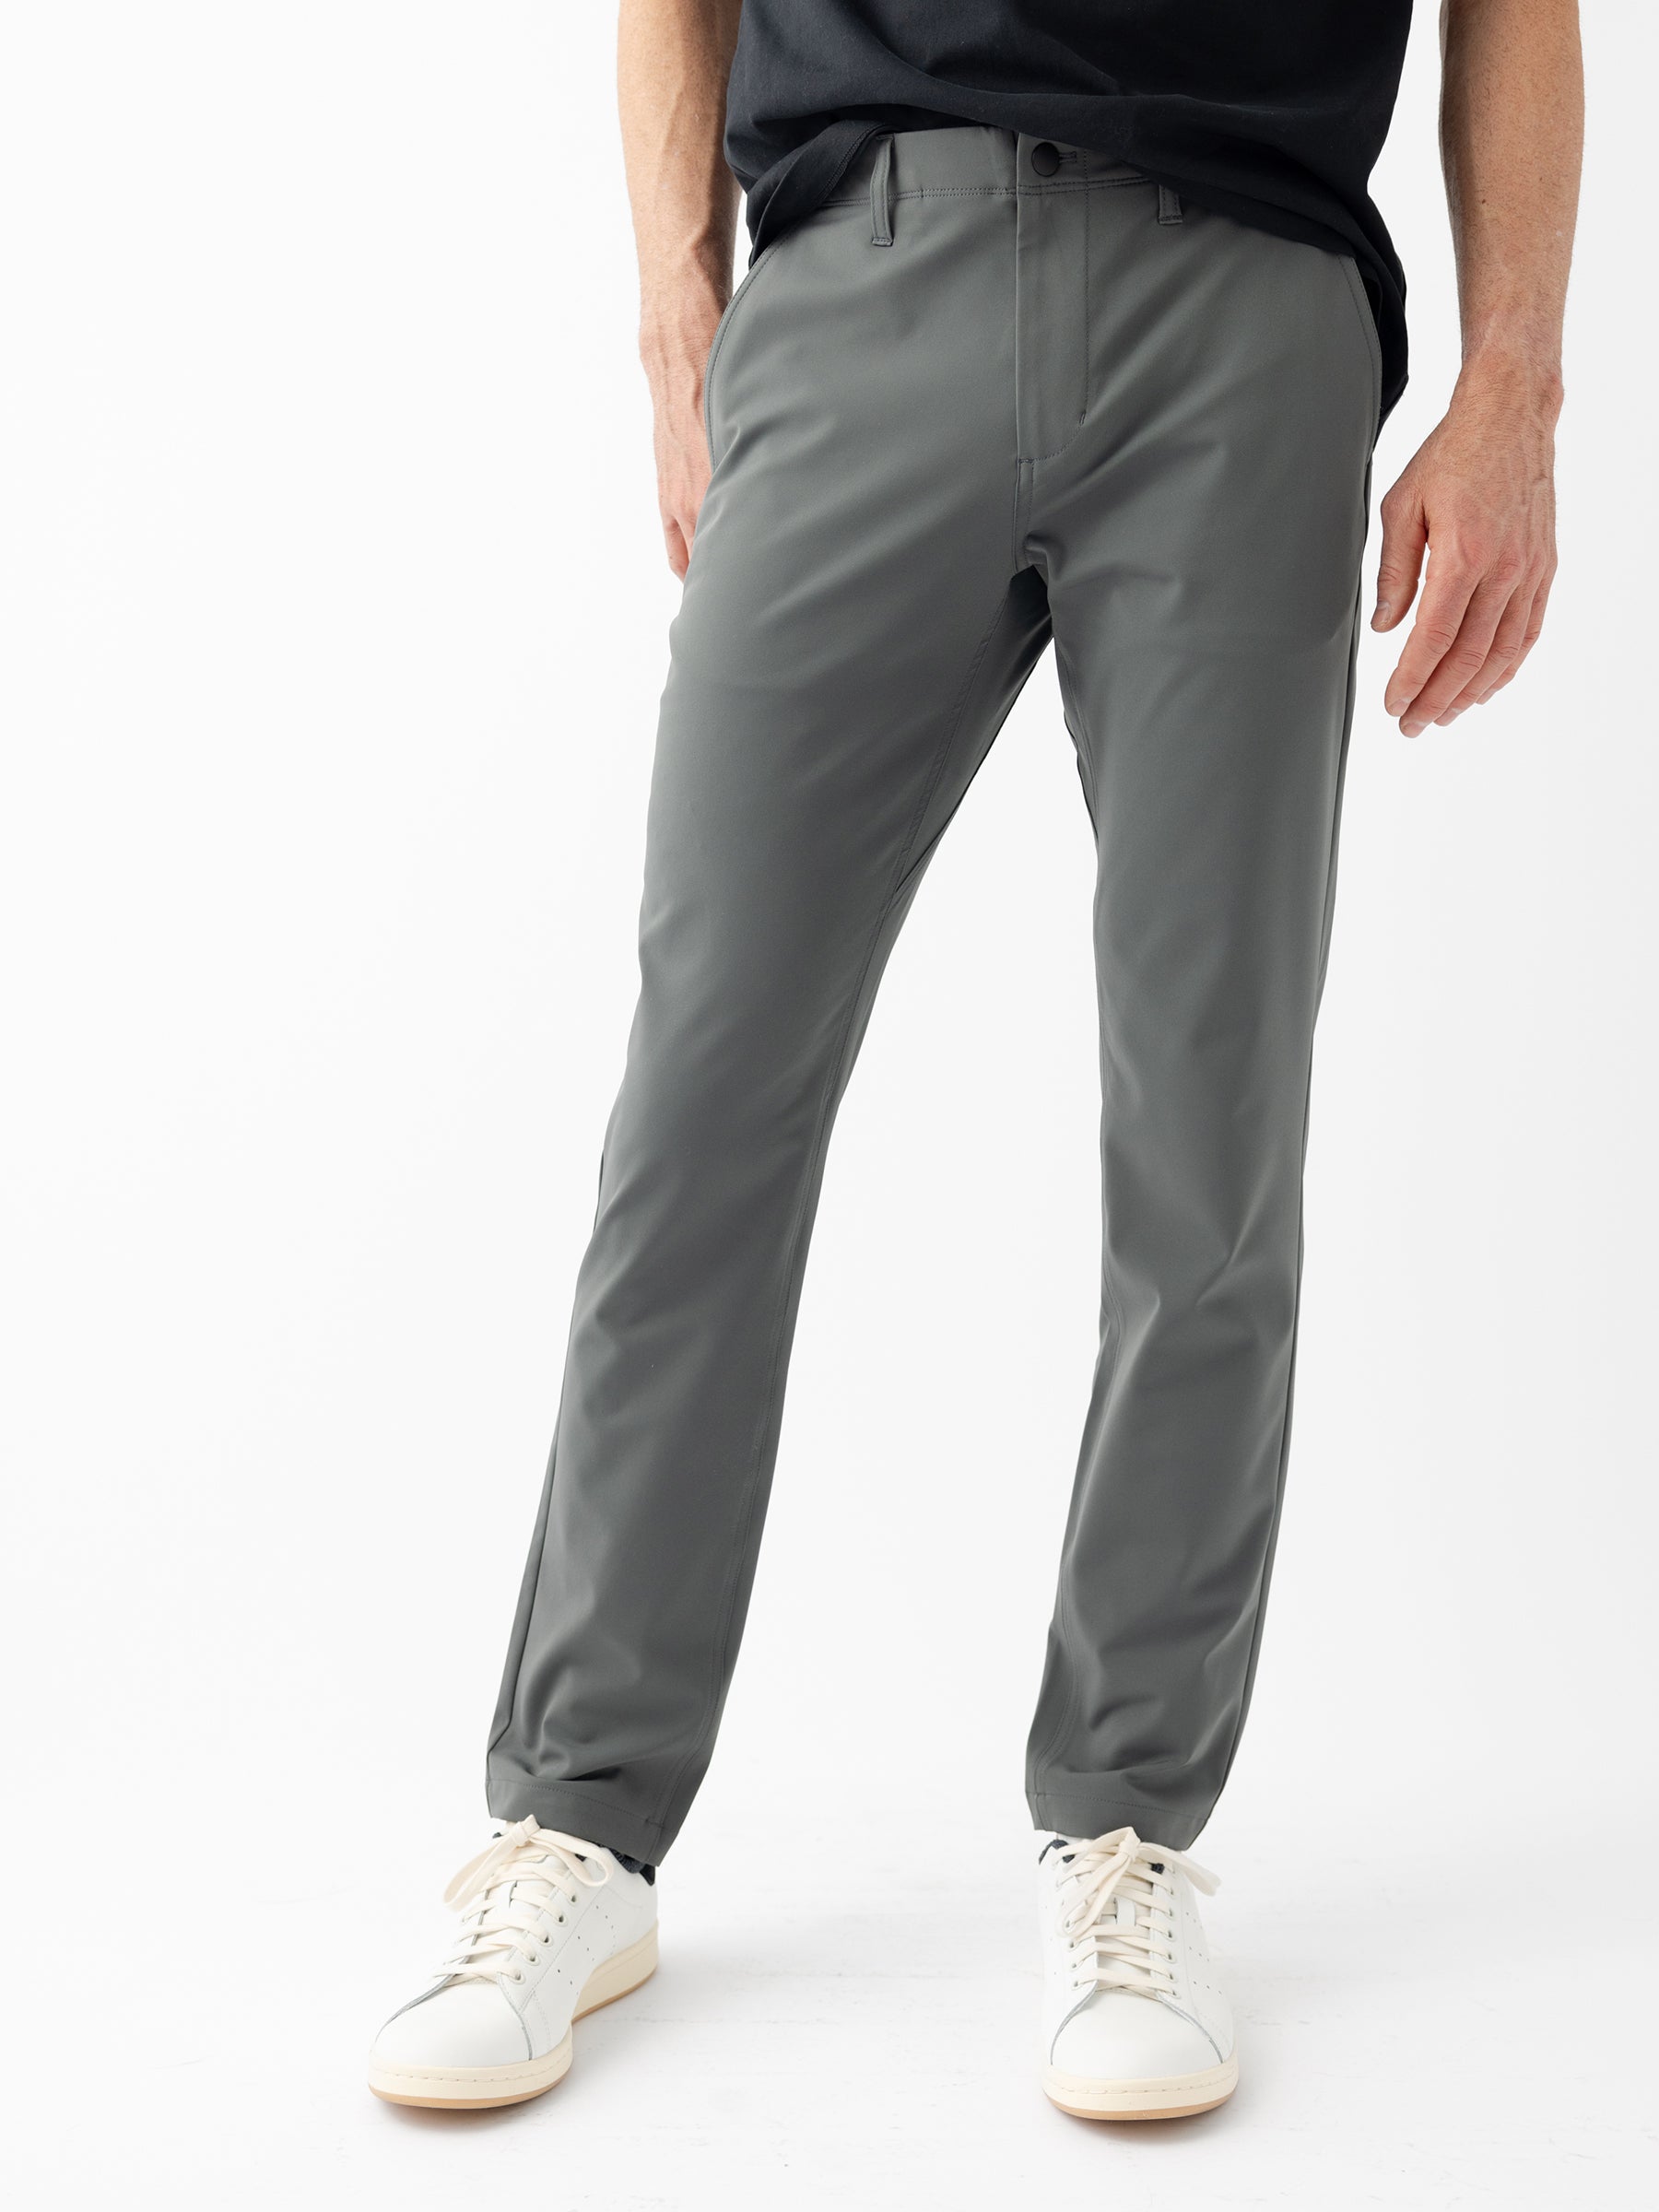 A person is standing against a plain white background wearing the Men's Everywhere Pant 30L by Cozy Earth in gray, paired with white sneakers. The person's upper body is partially visible, showing just the lower part of a black shirt and one arm hanging down. |Color:Coal